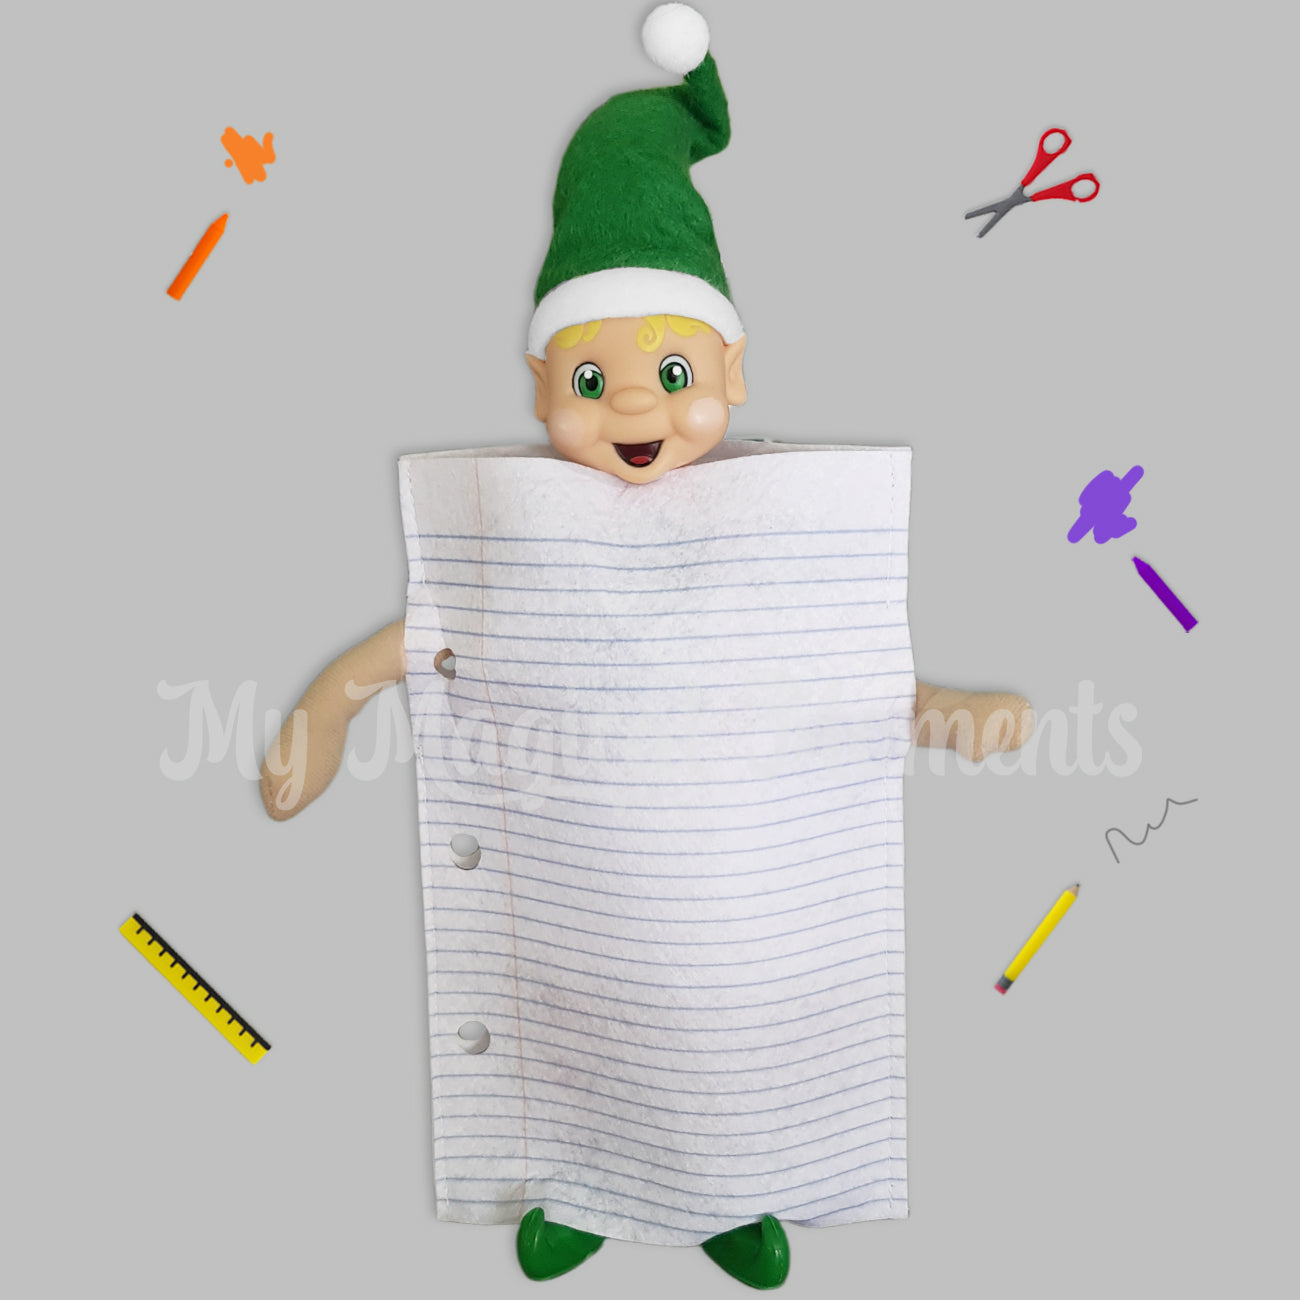 Blonde hair elf dressed in a paper costume, with miniature scissors and pencils around him